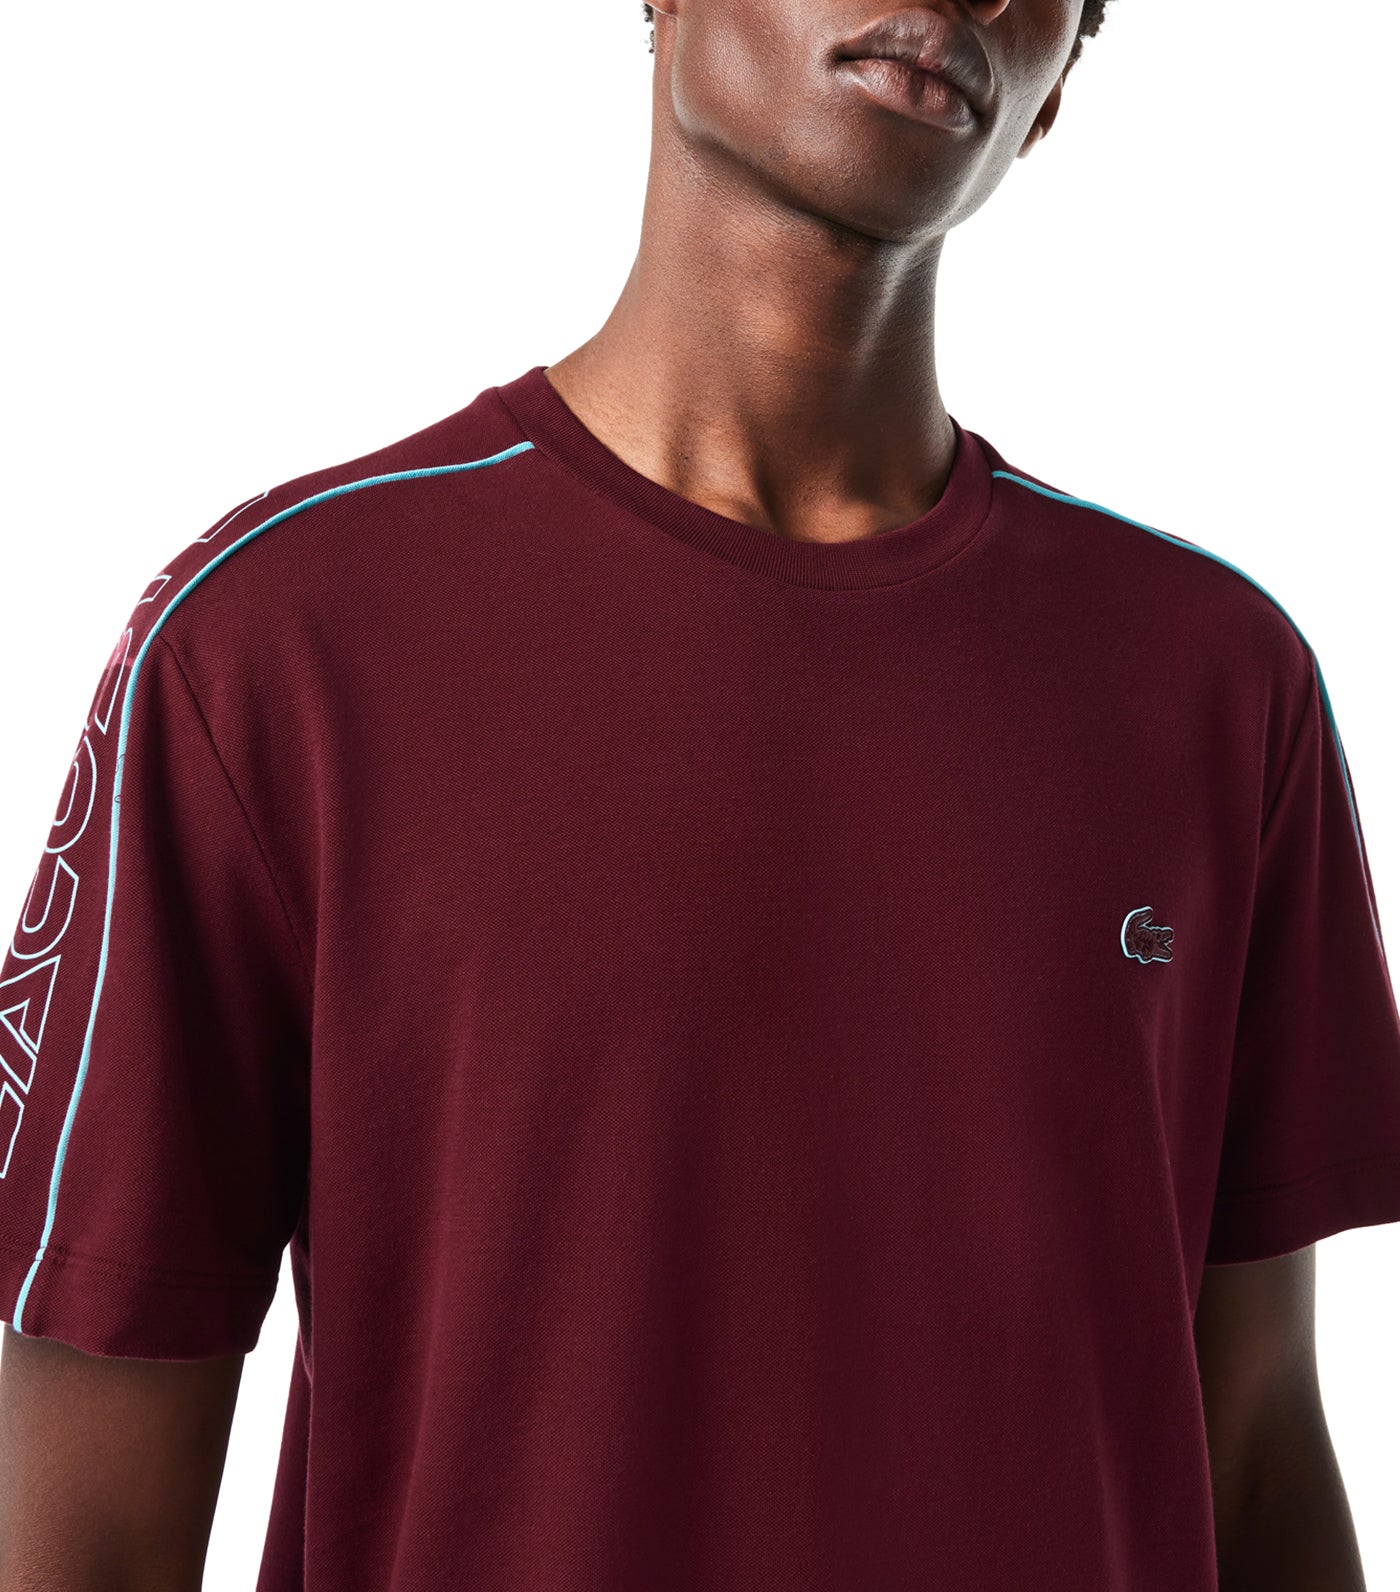 Contrast Accent Lacoste Branded T-Shirt Zin/Cove